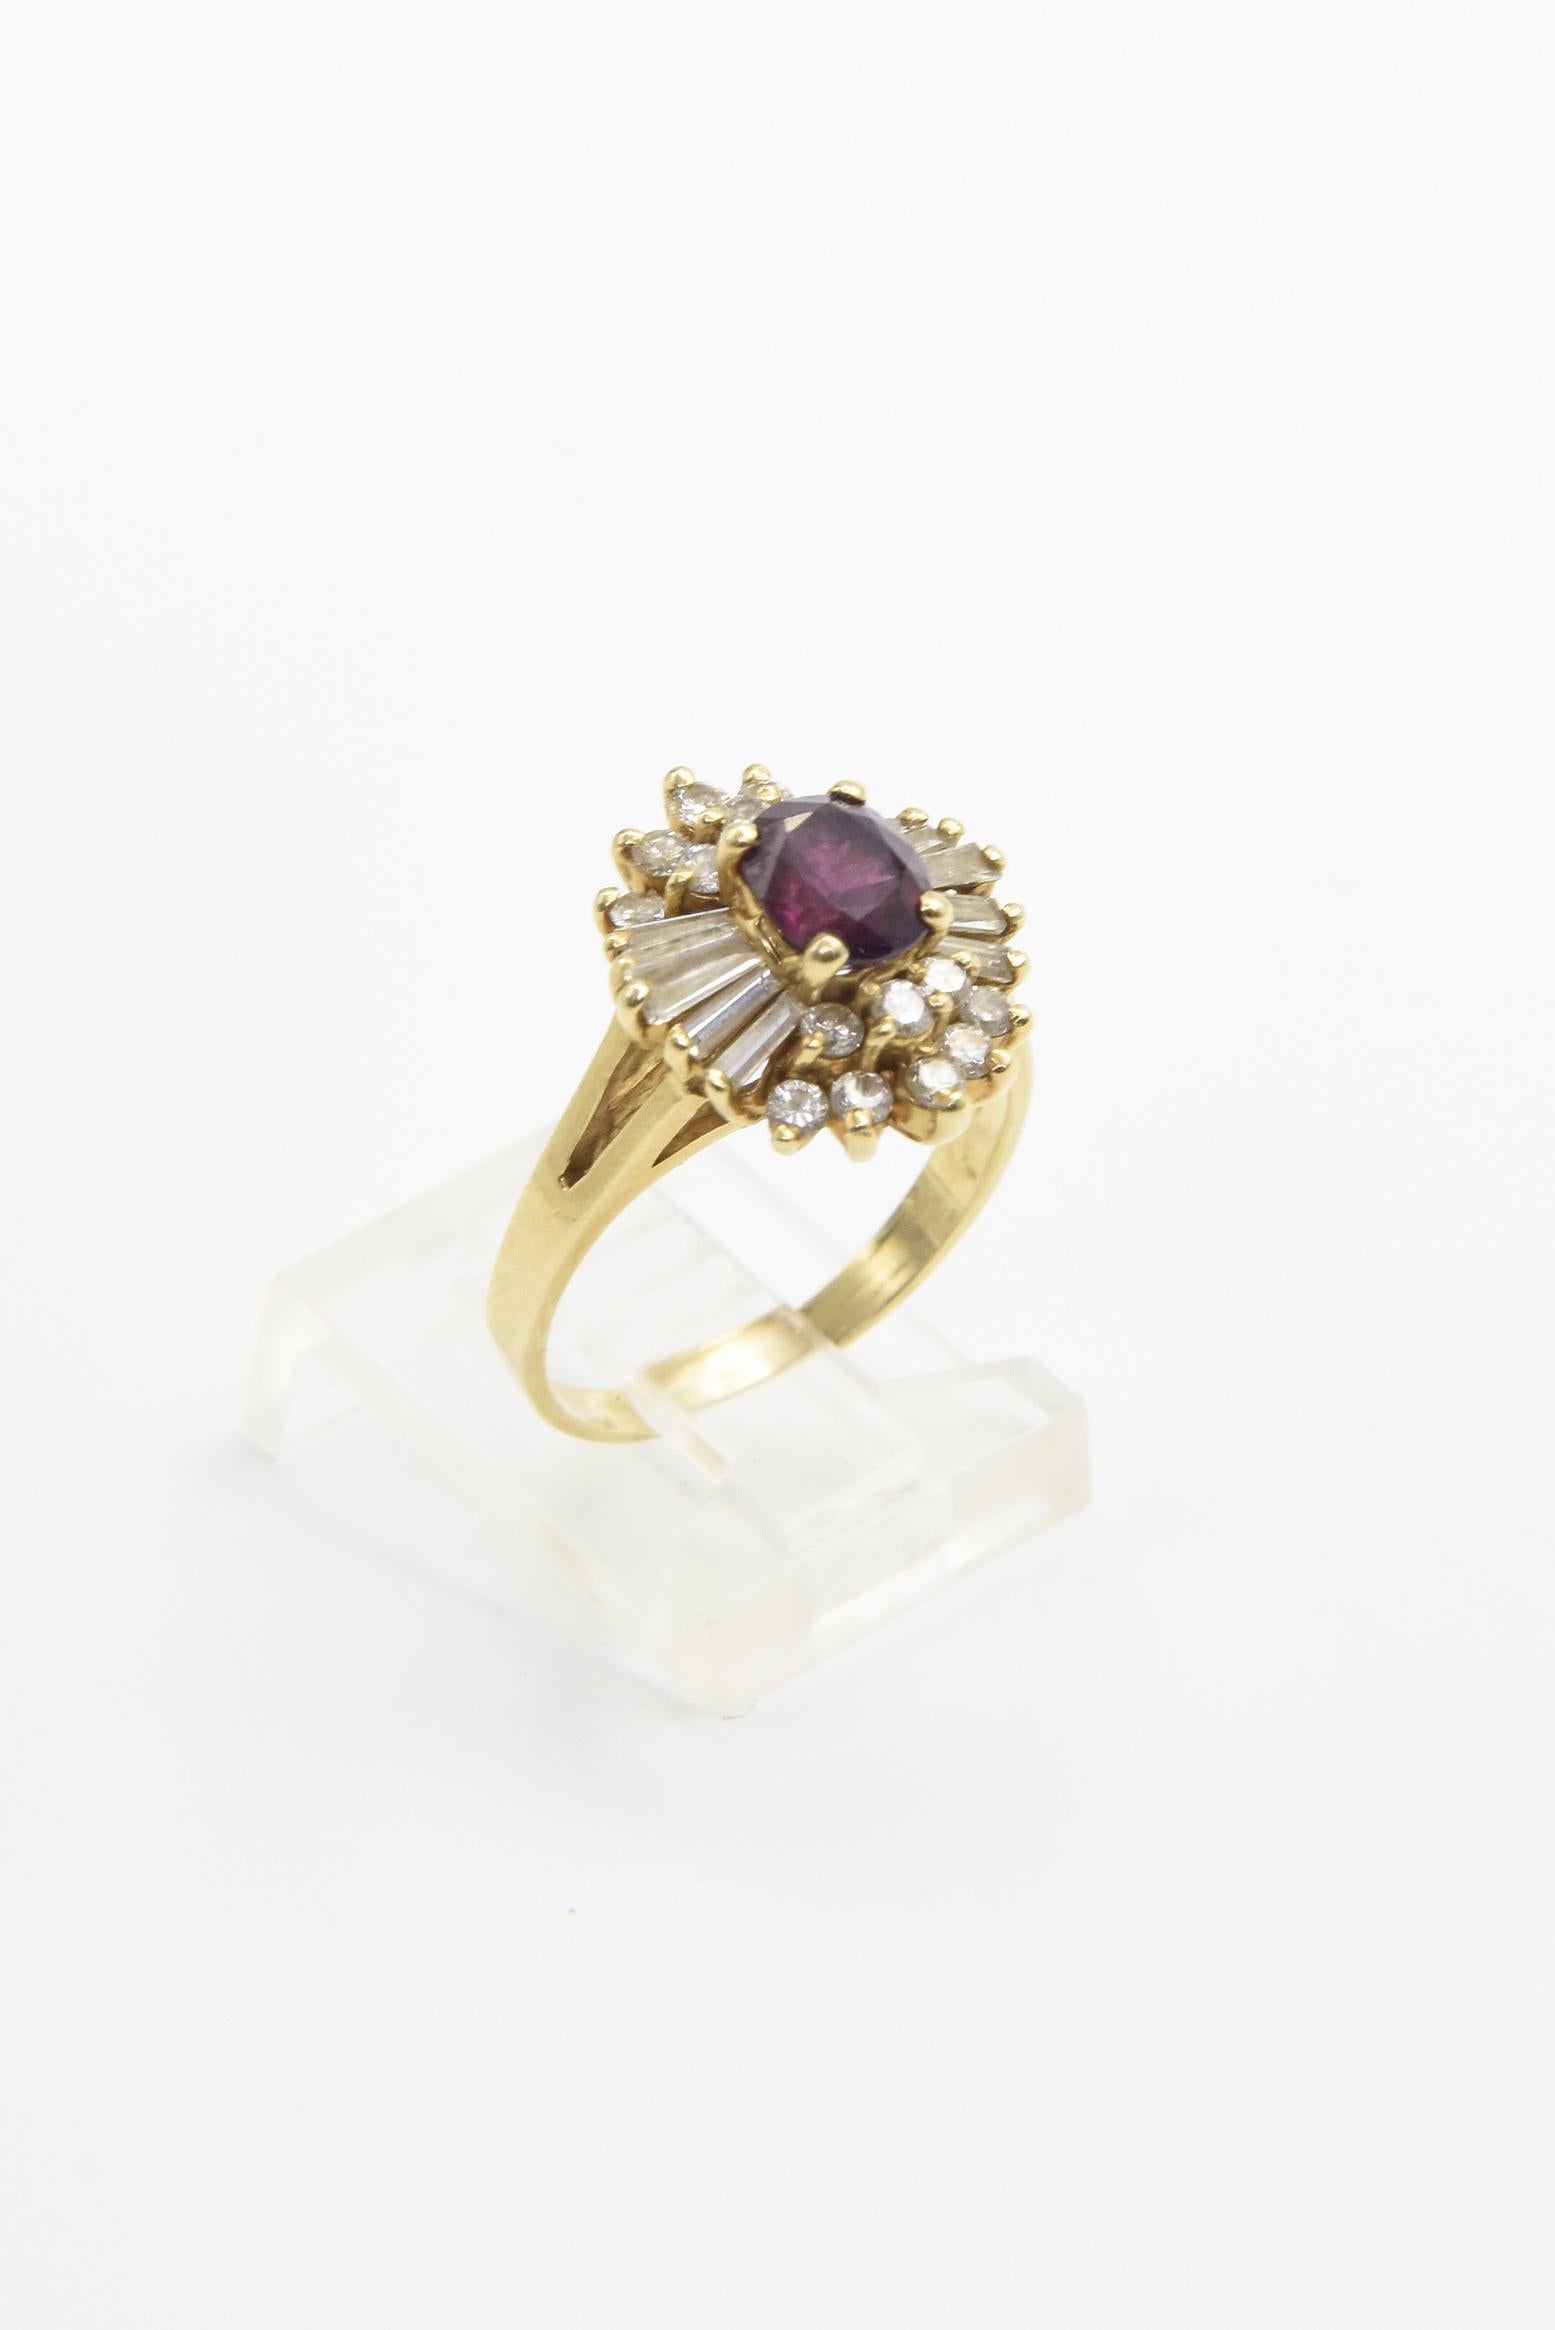 Ruby Diamond Ballerina Gold Cocktail Ring In Good Condition For Sale In Miami Beach, FL